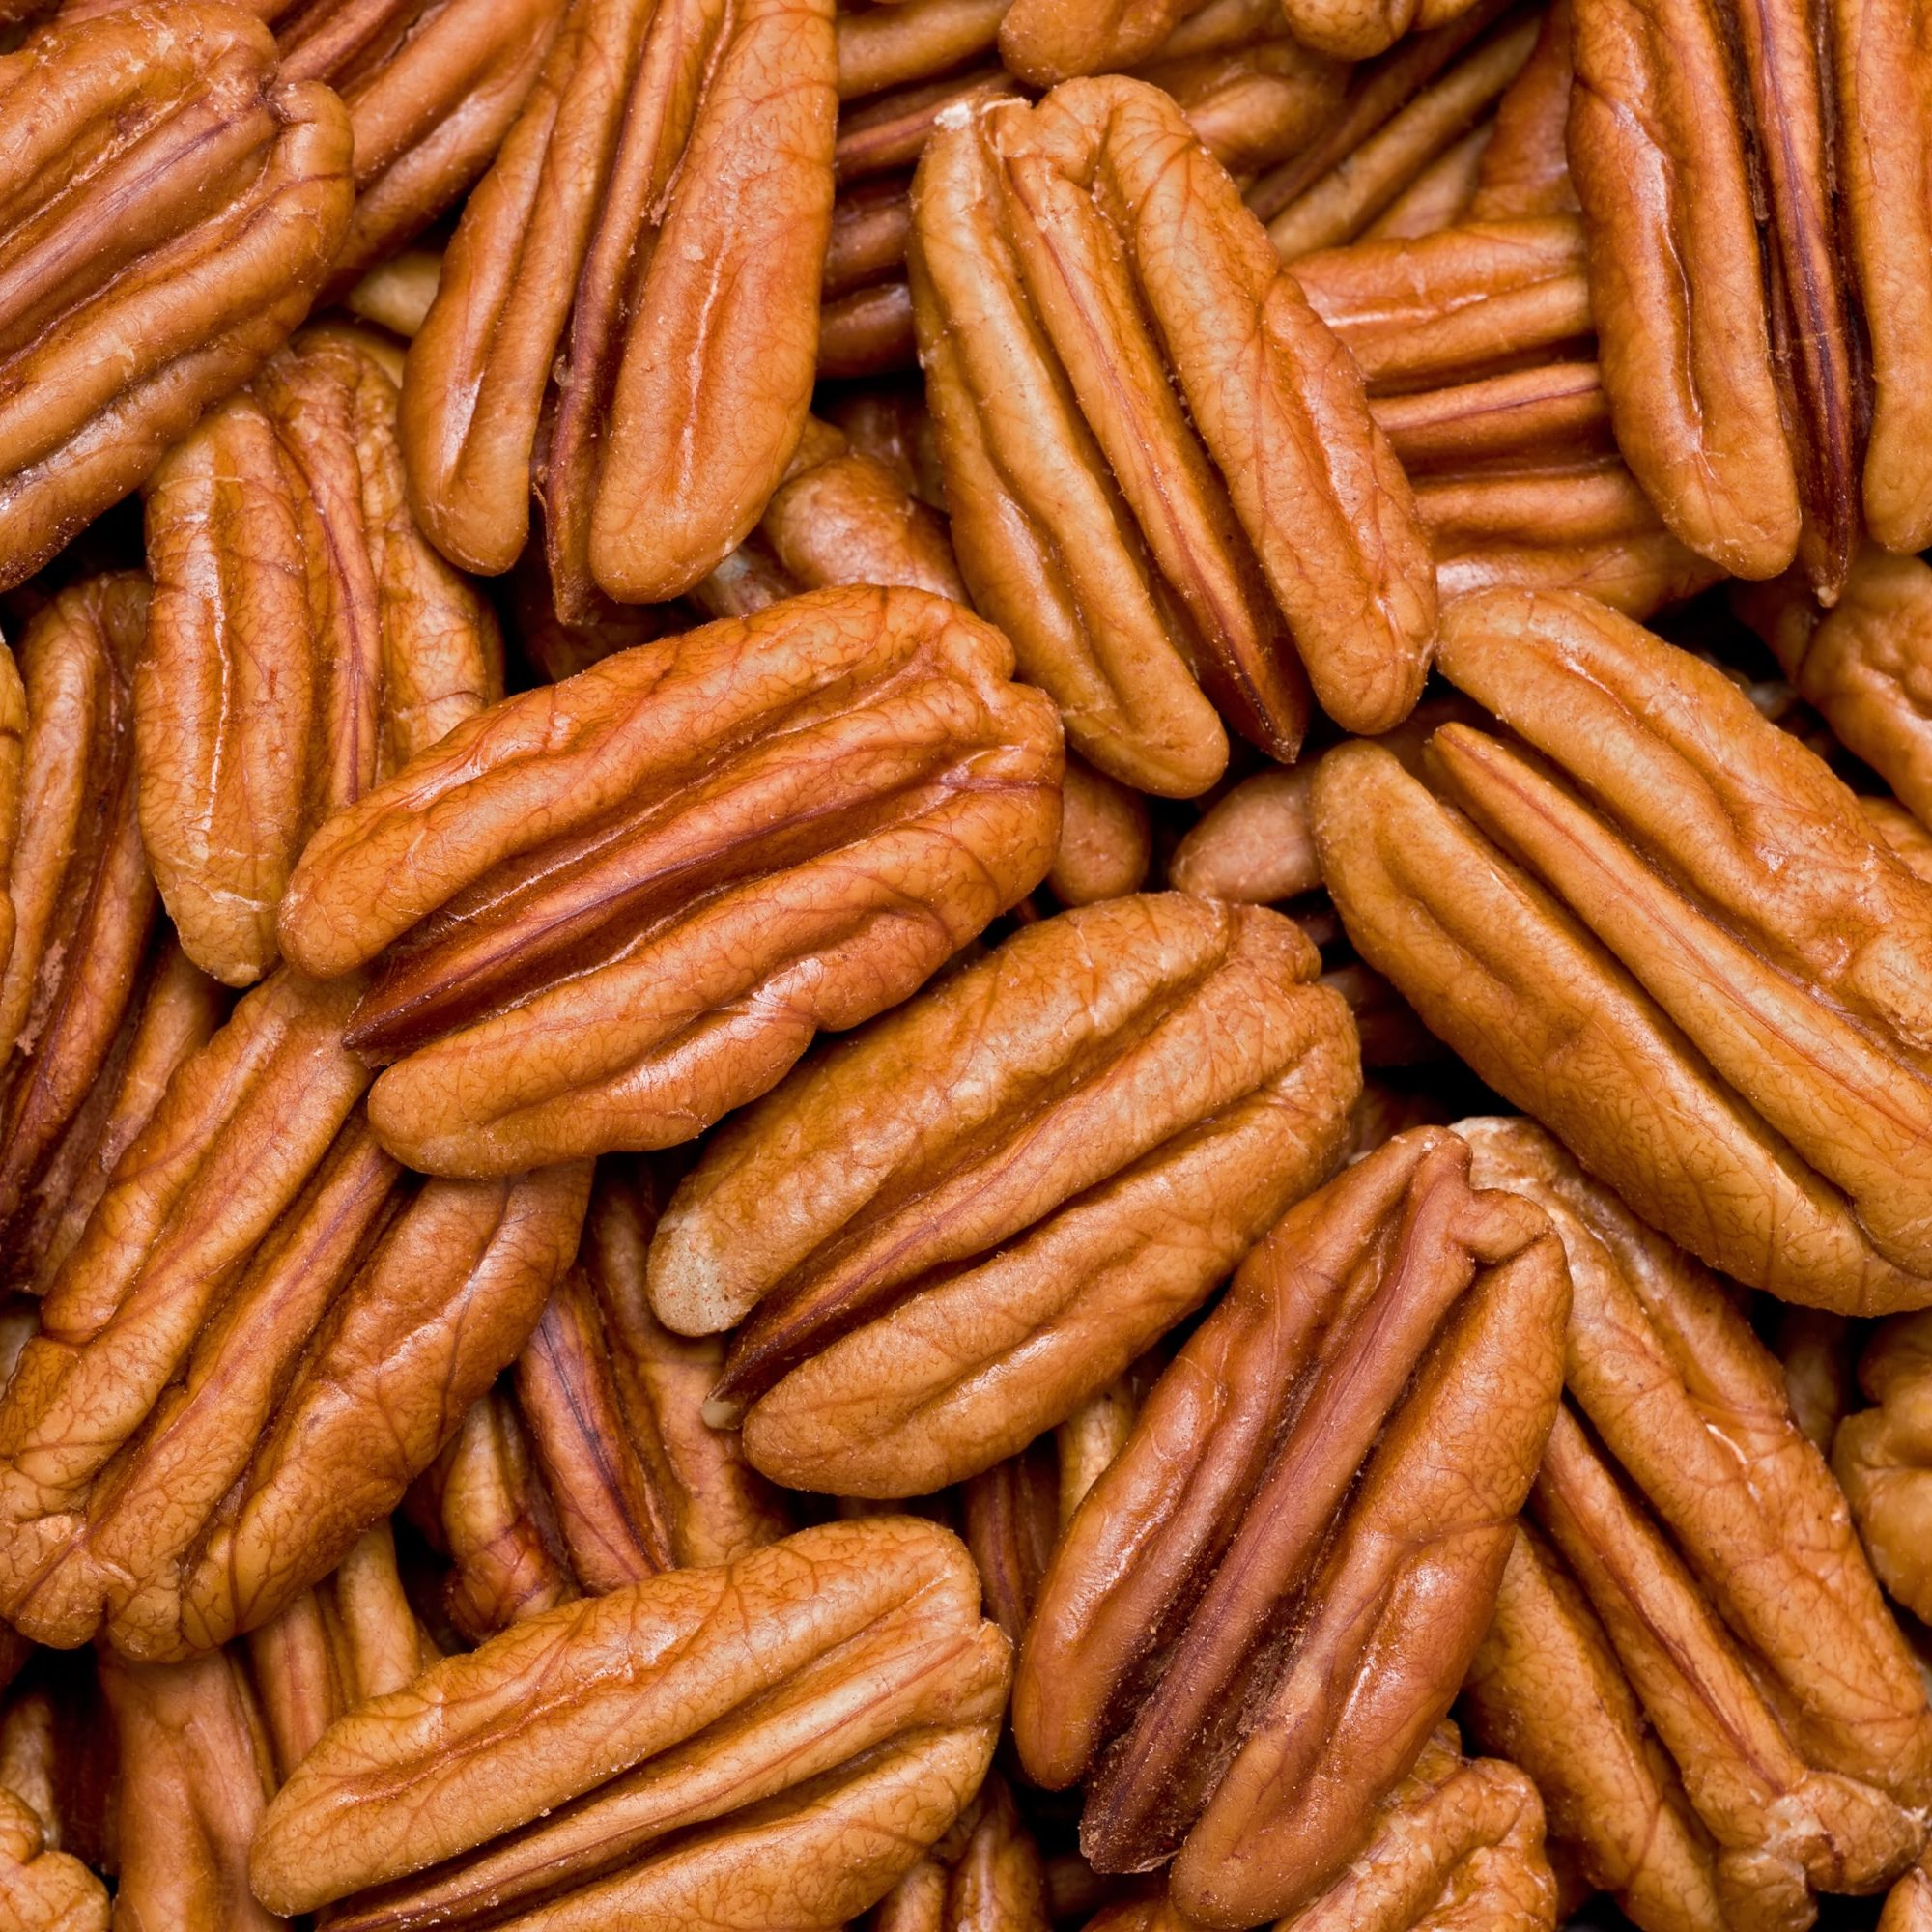 Background texture of shelled pecans.